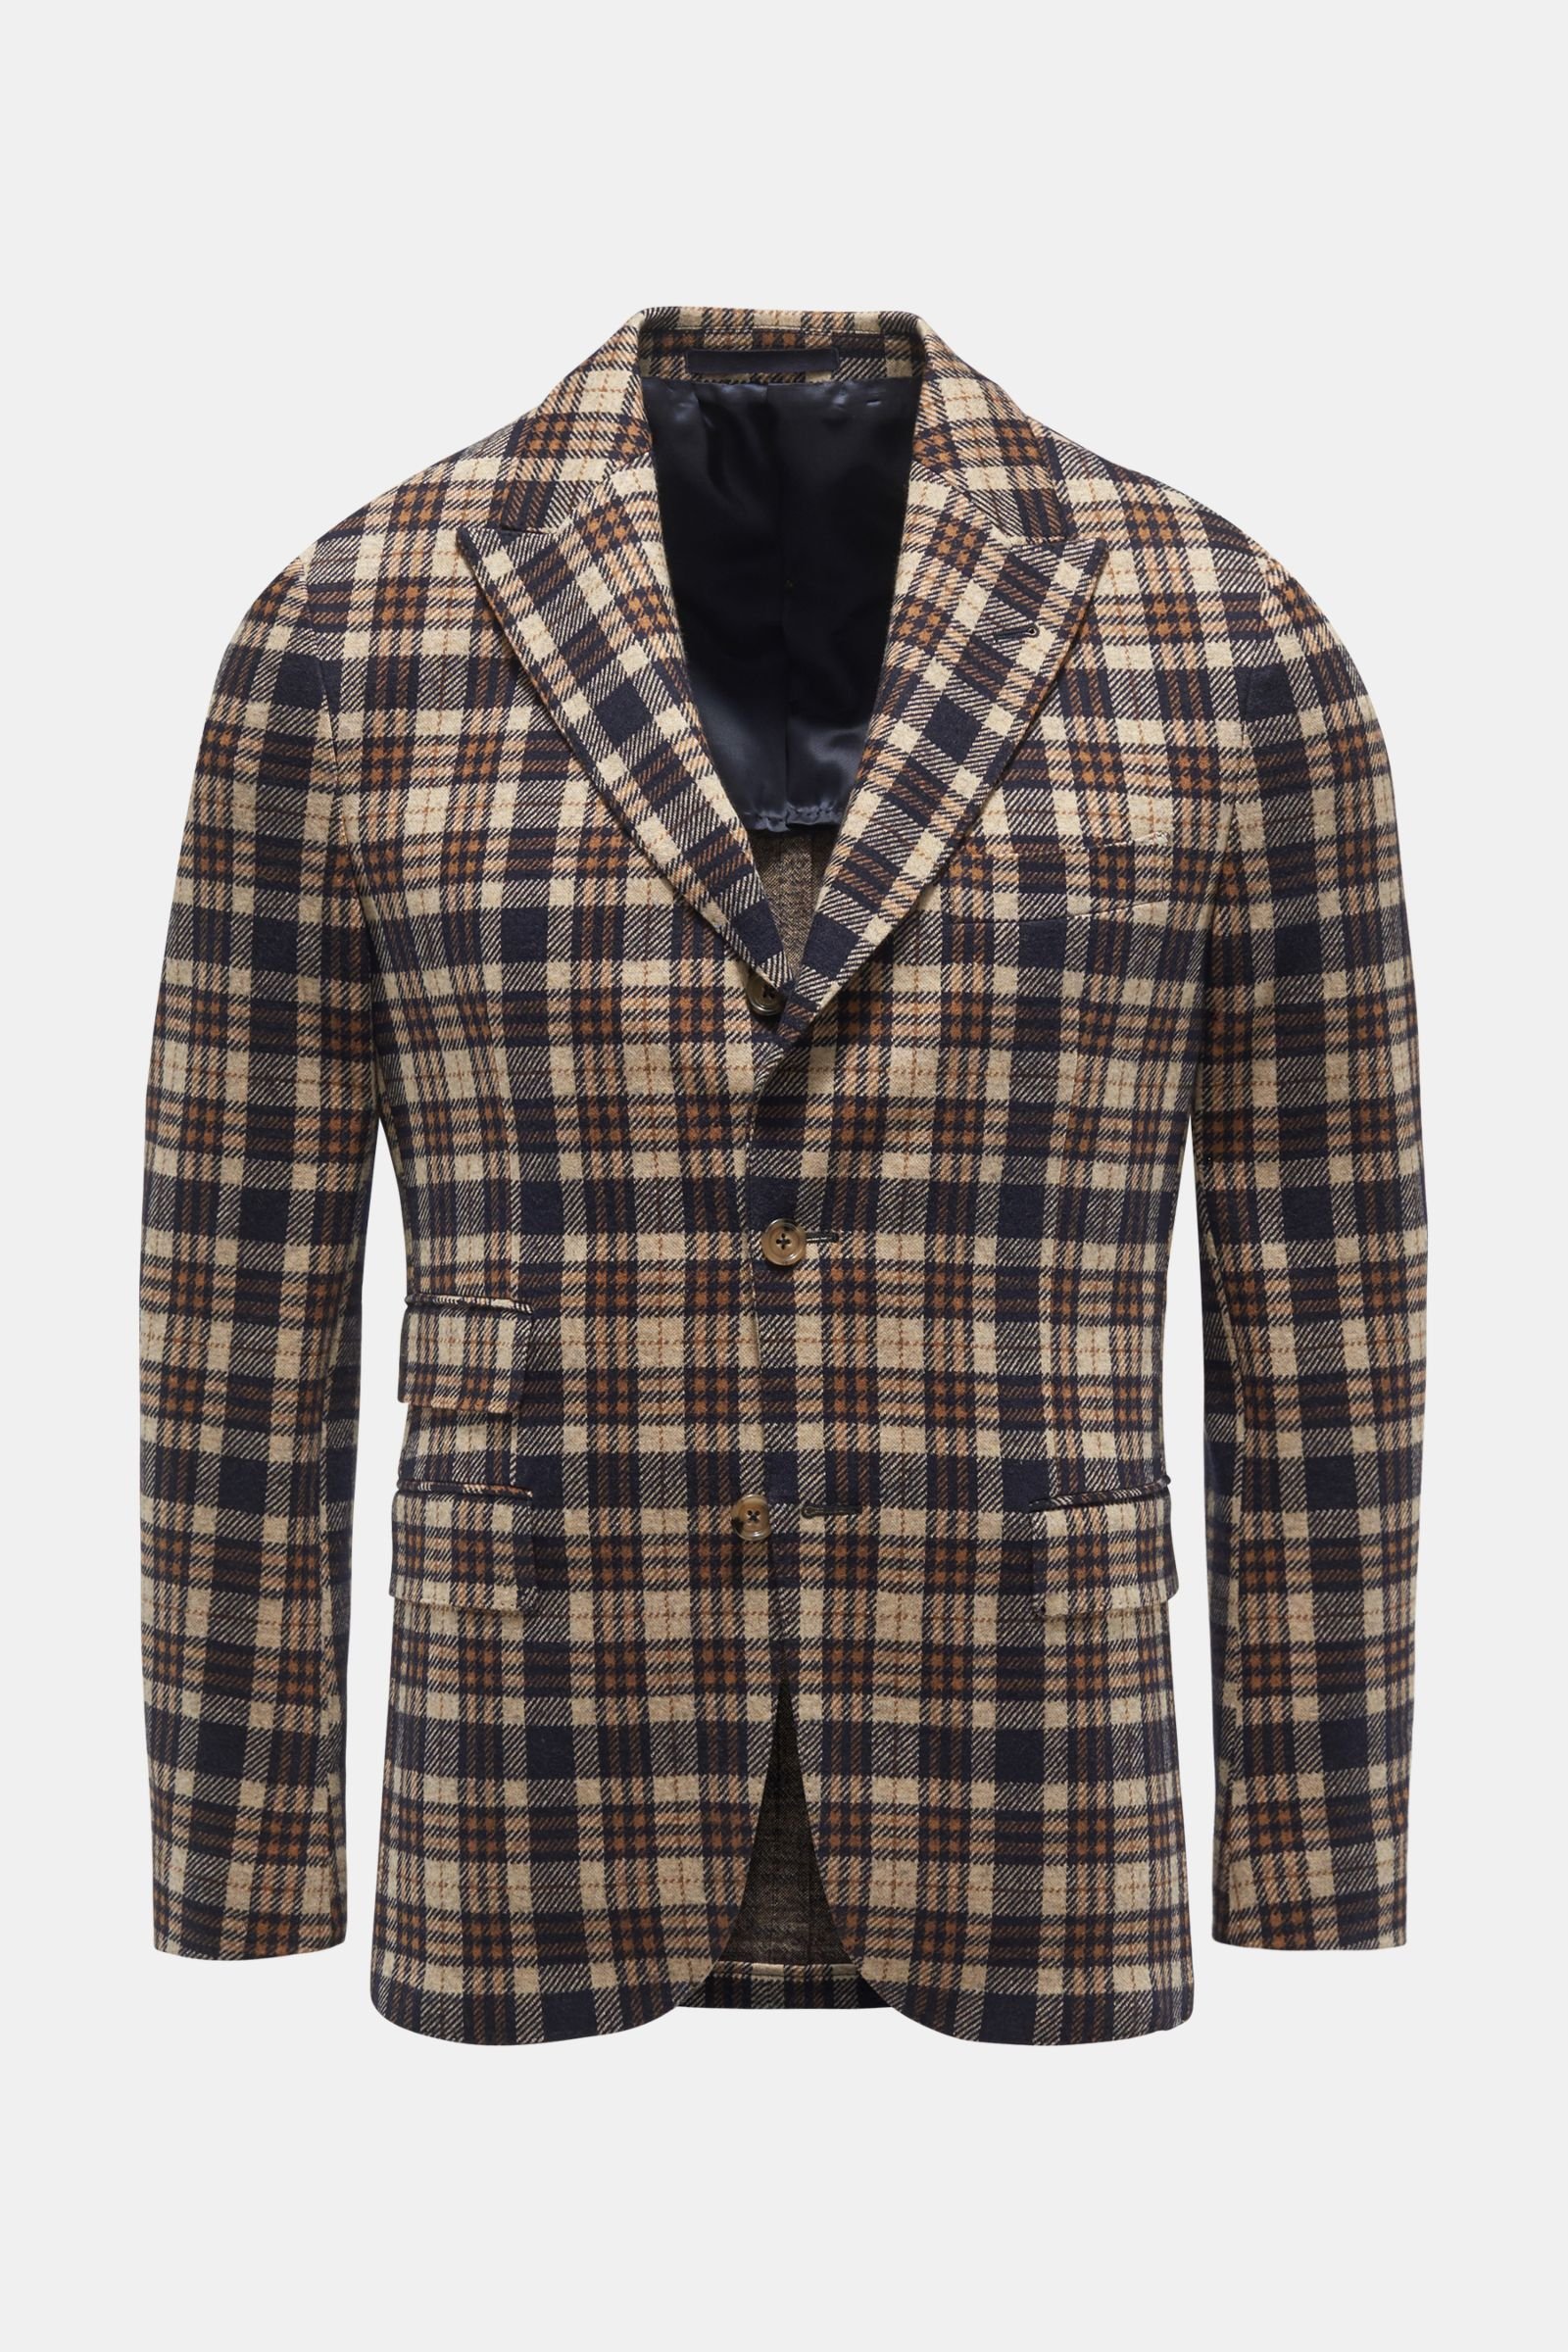 Smart-casual jacket beige/black checked